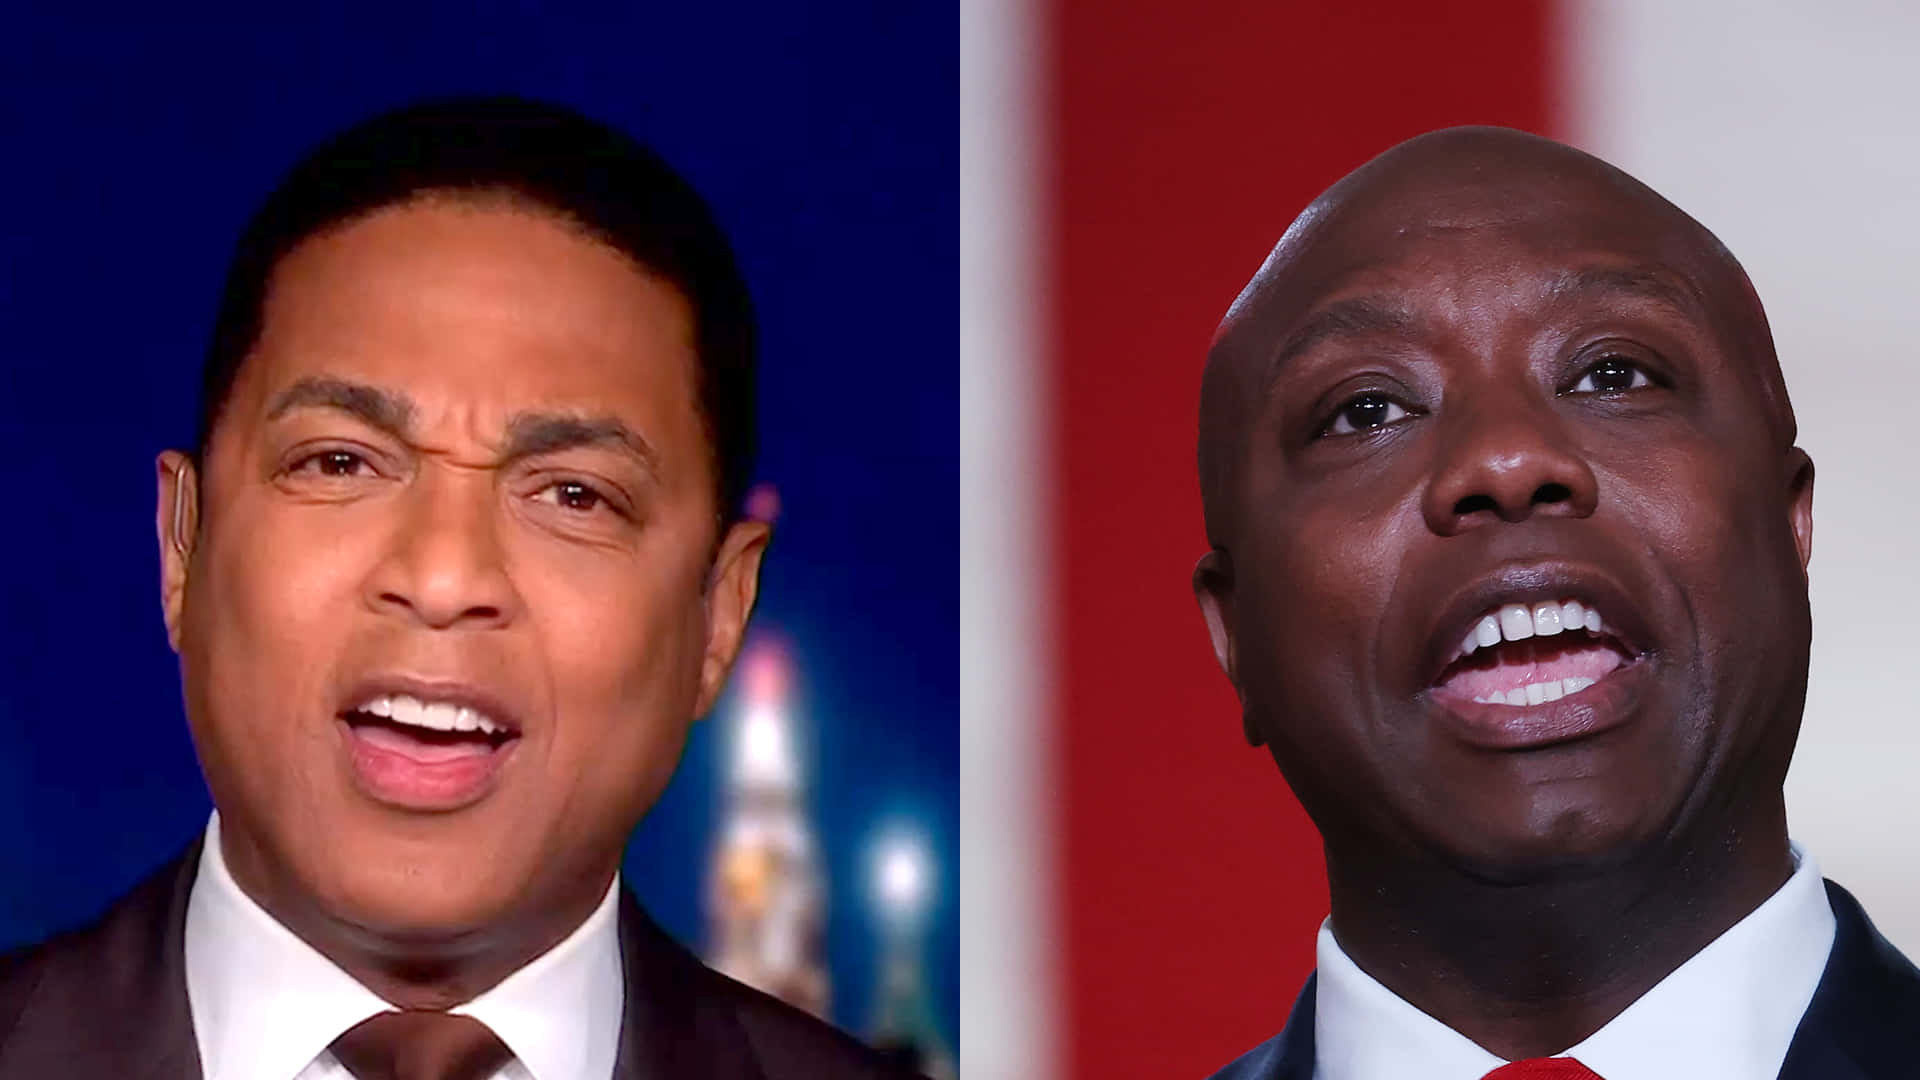 Timscott Och Don Lemon. (note: In Swedish, Names Are Not Translated Or Adapted To The Language.) Wallpaper